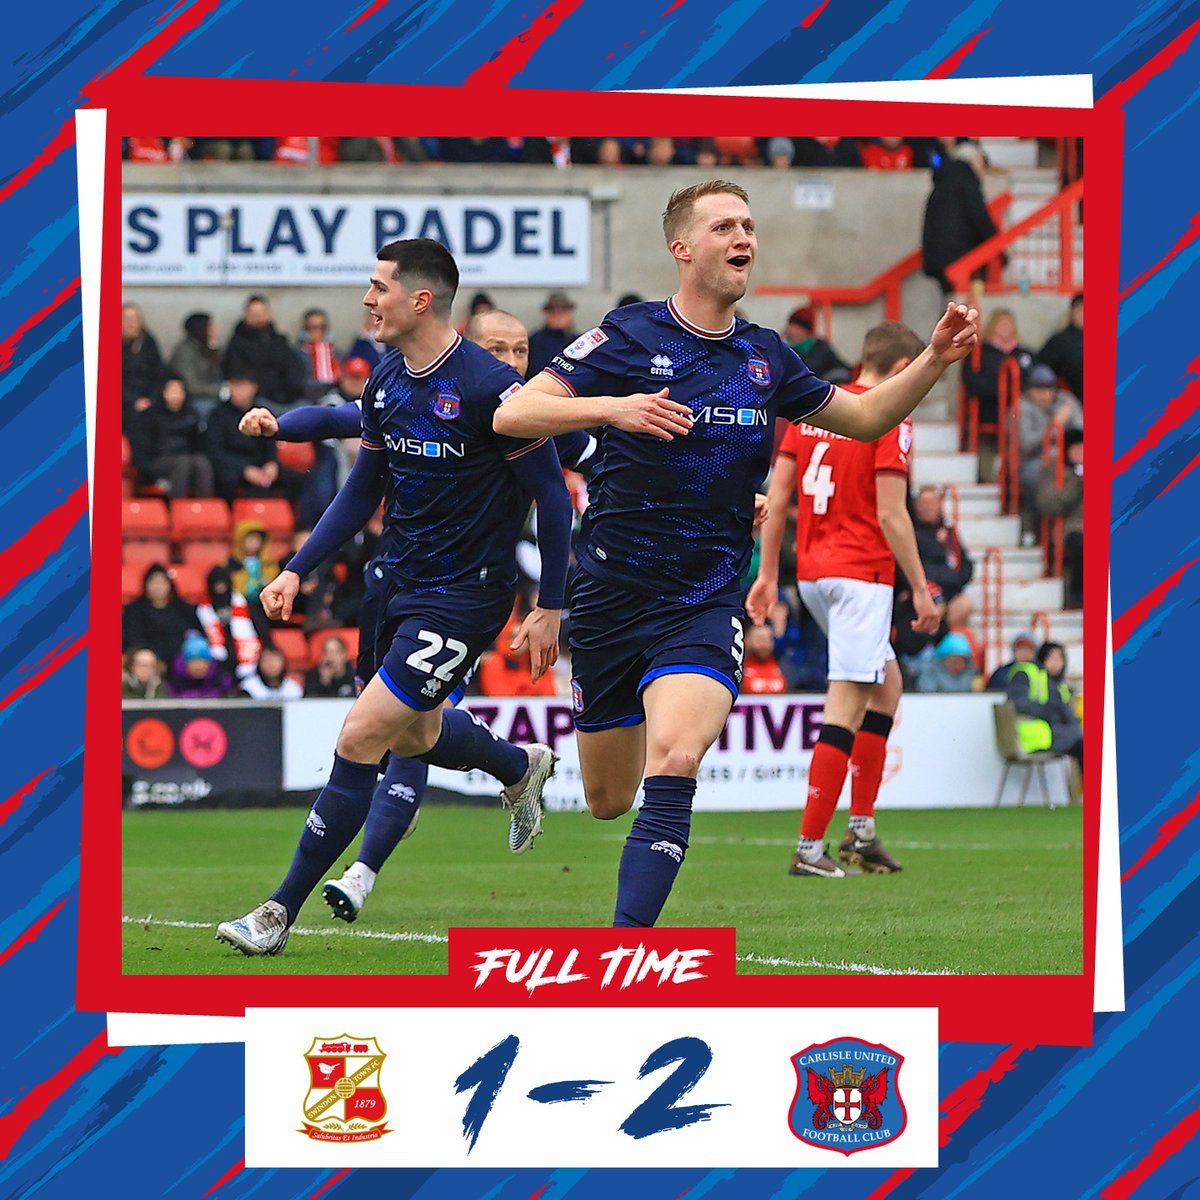 That's full time, we won 2-1 - get in!! #cufc